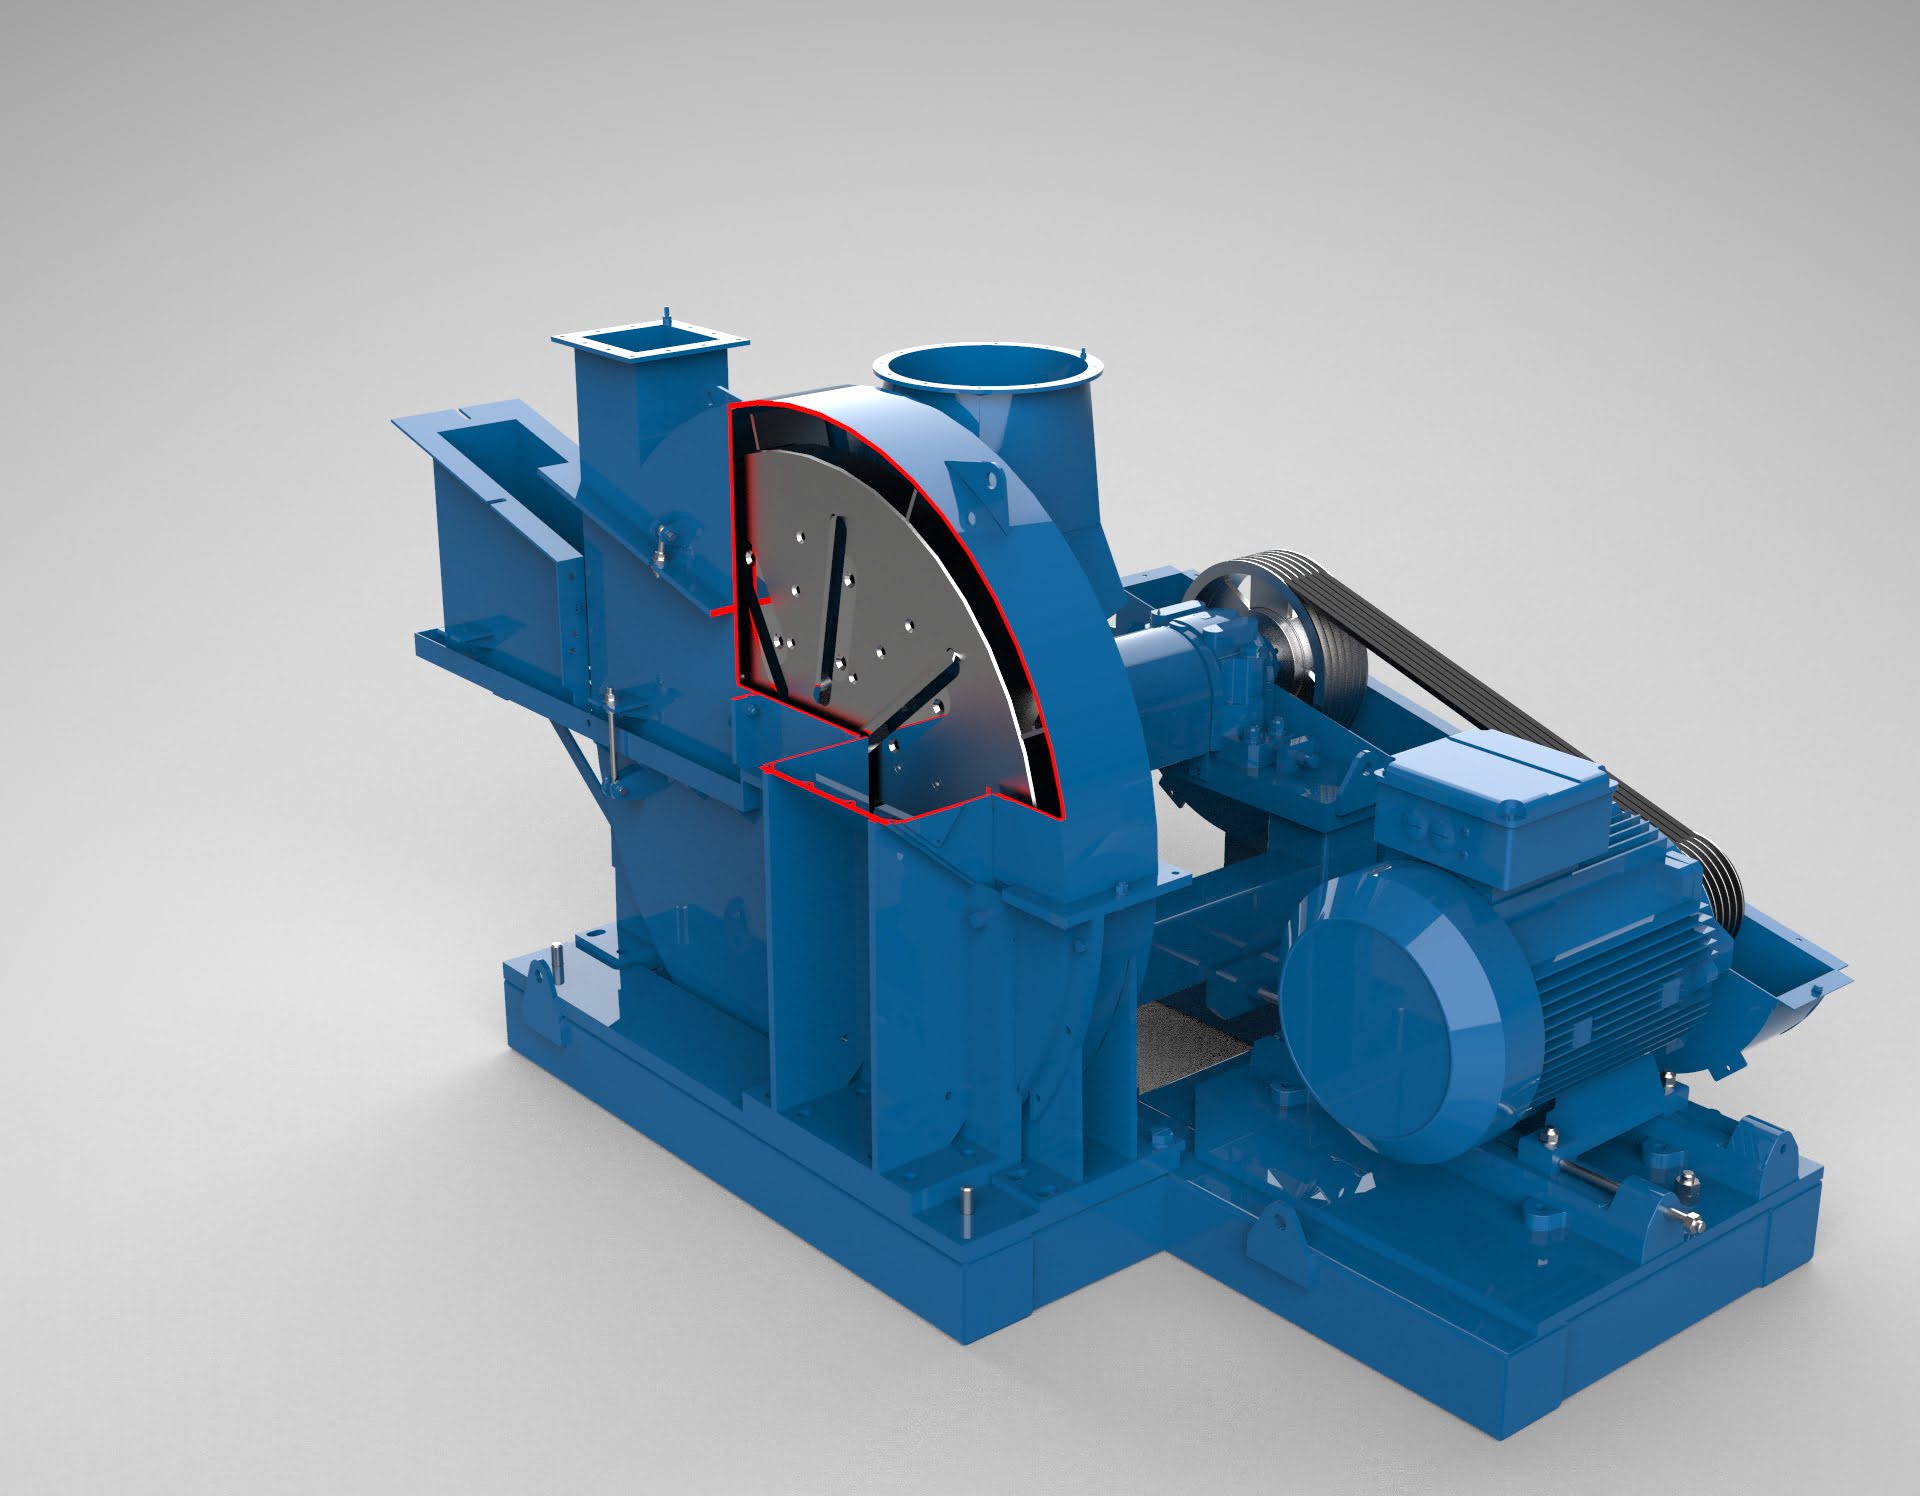 Rendering of a FMW Re-Chipper as a part of the chip screening system